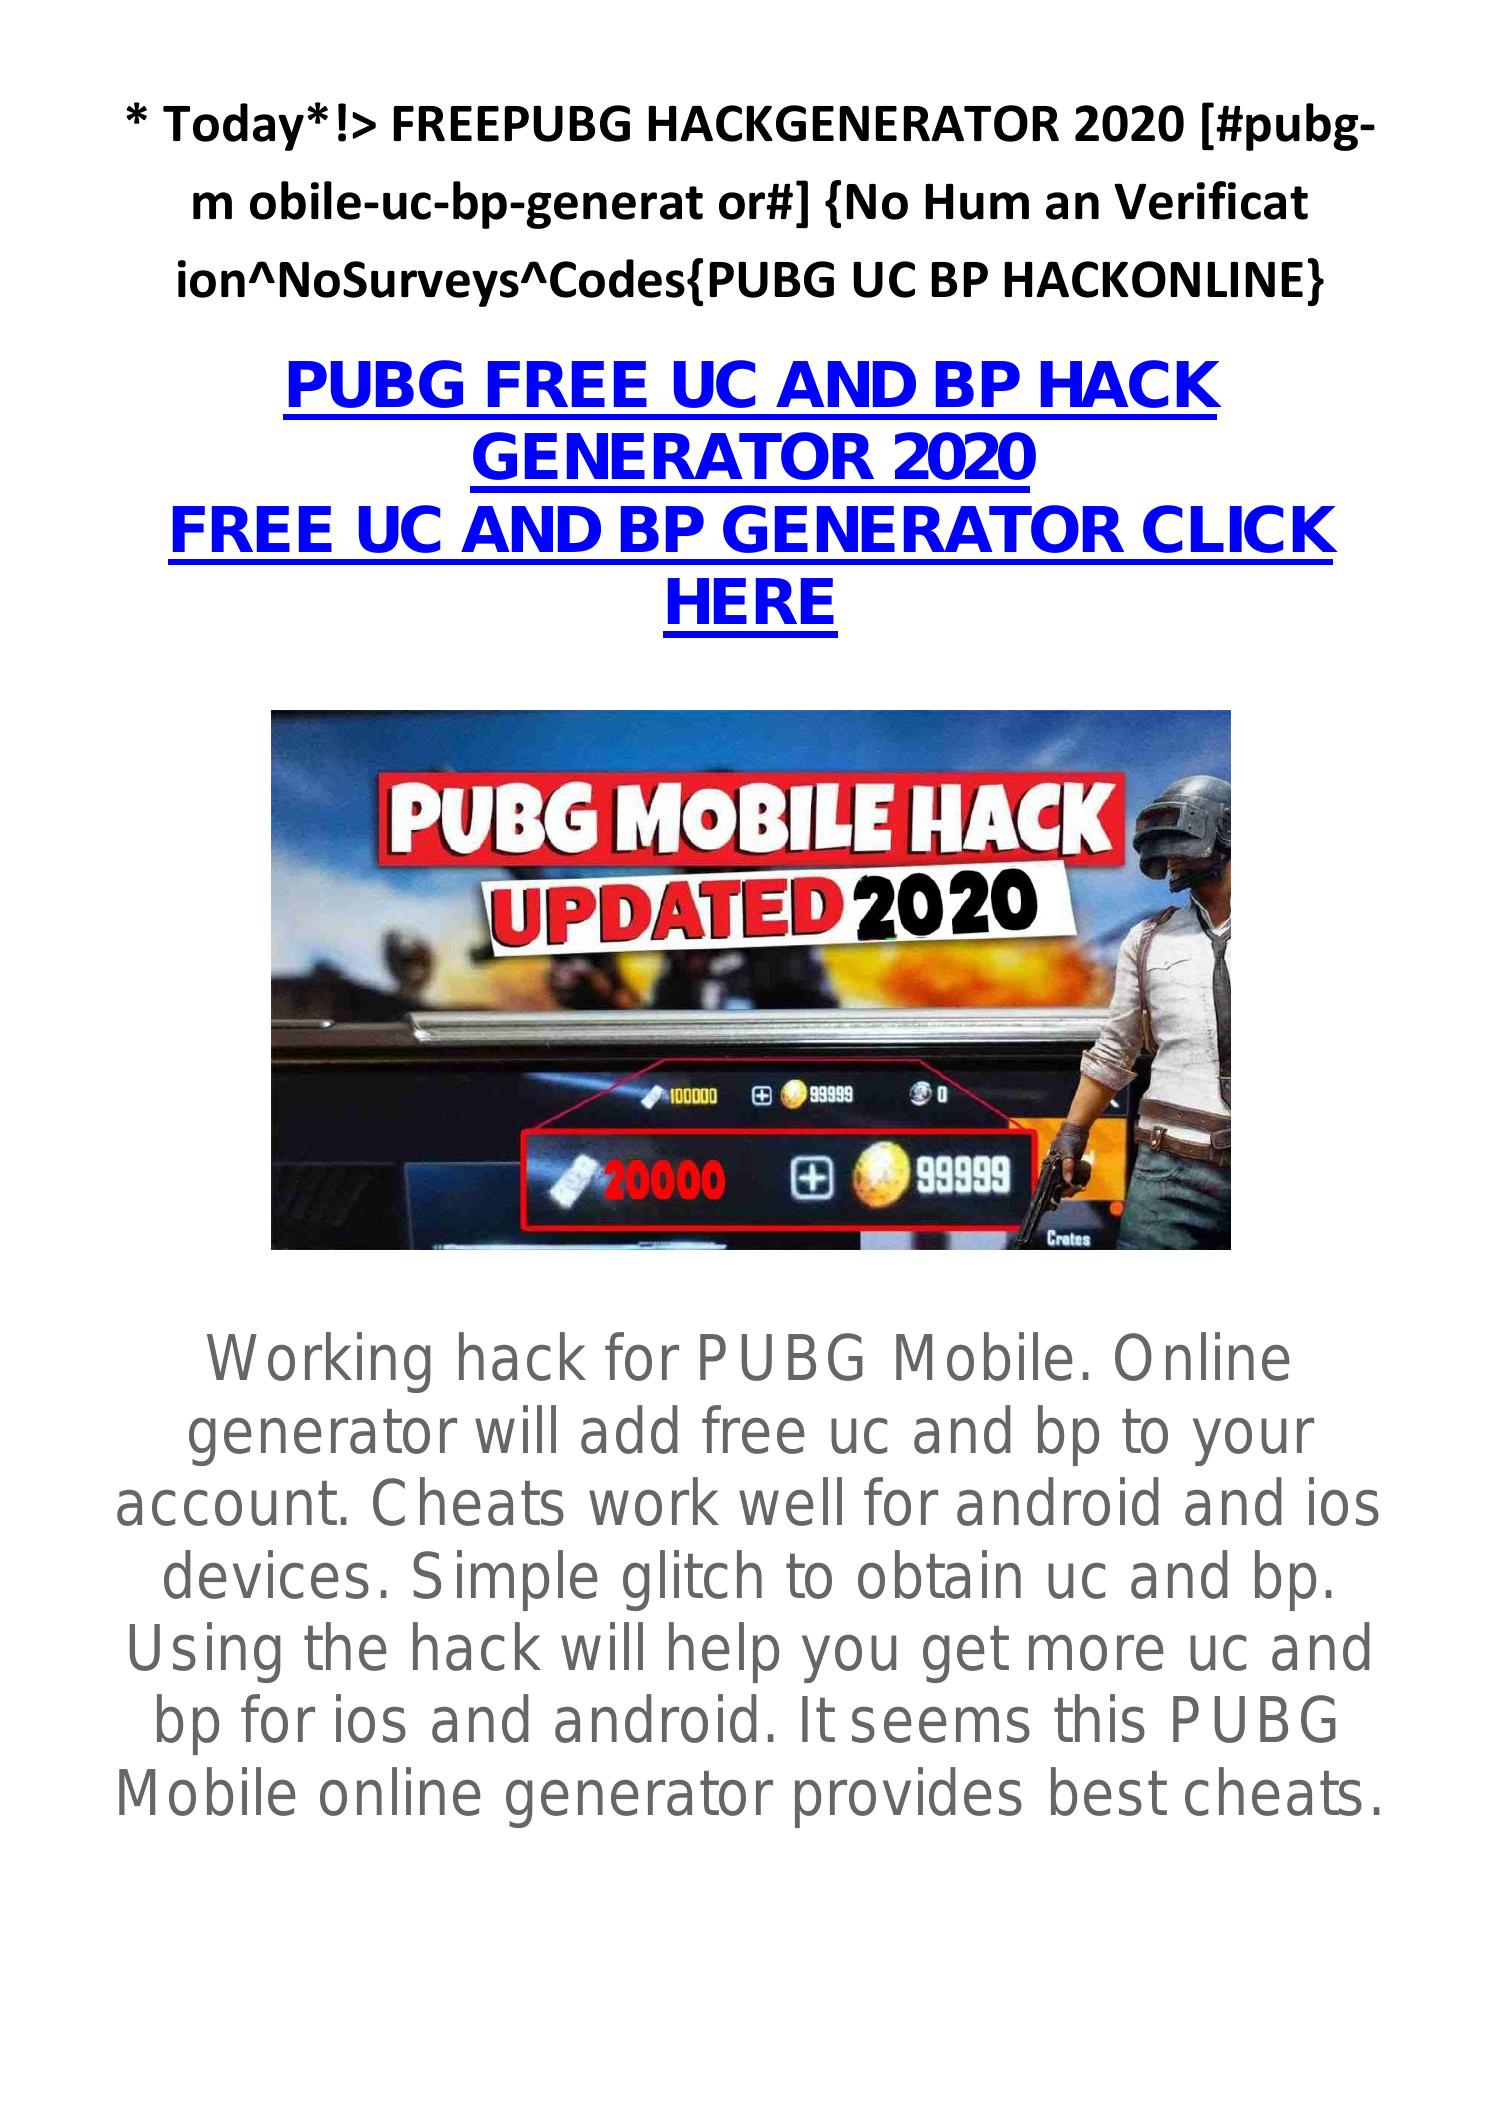 Today Pubg Free Uc And Bp Hack Generator Pdf Docdroid